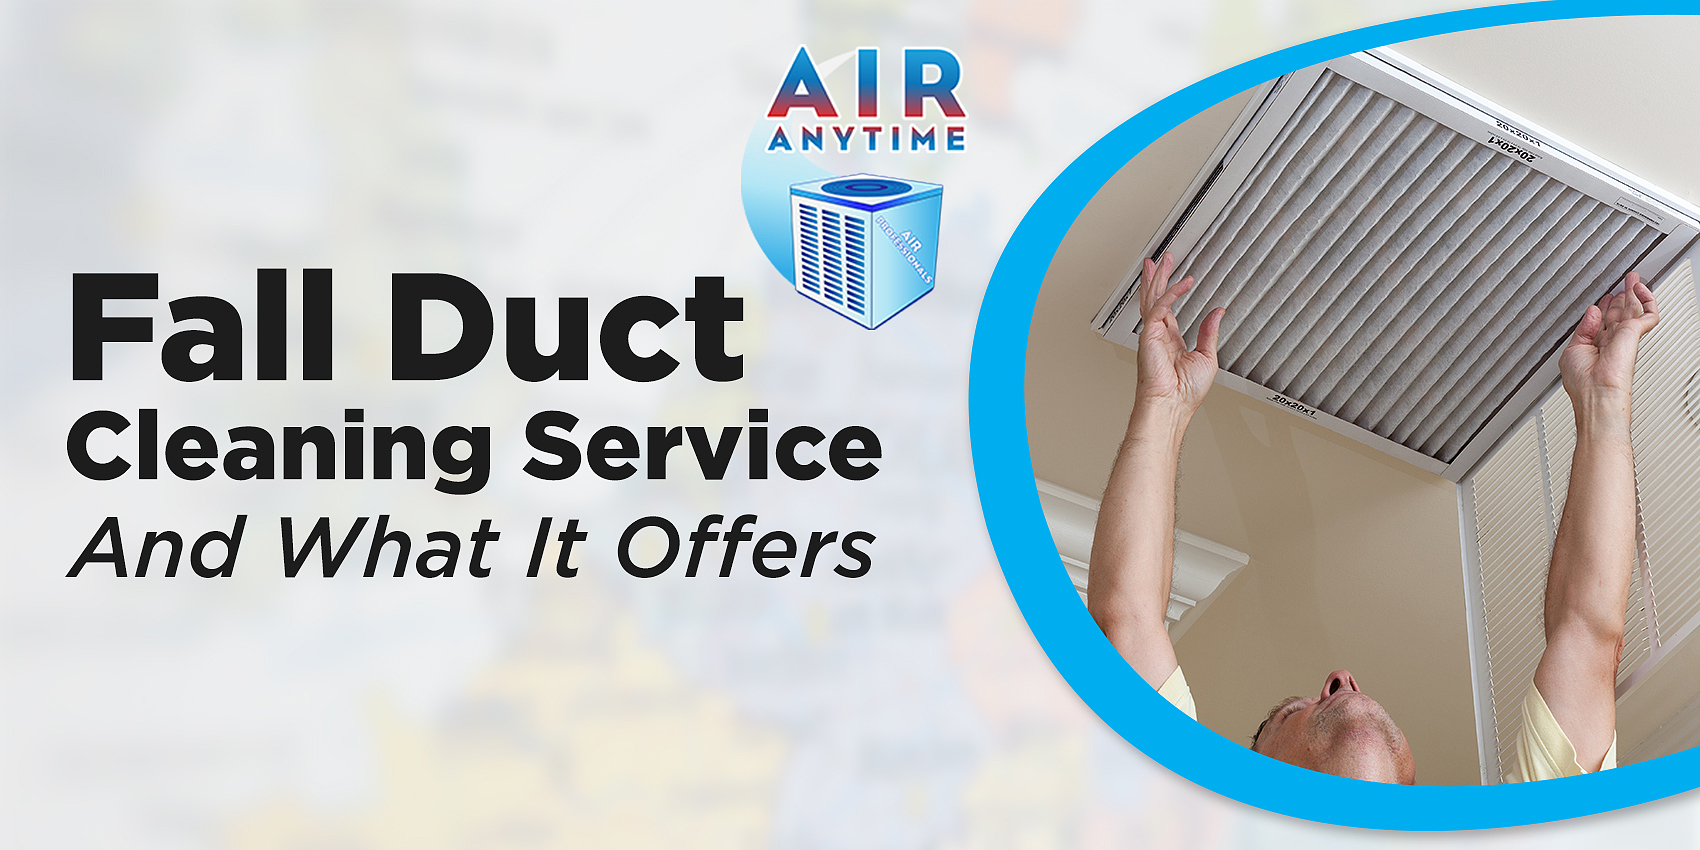 Fall Duct Cleaning Service And What It Offers